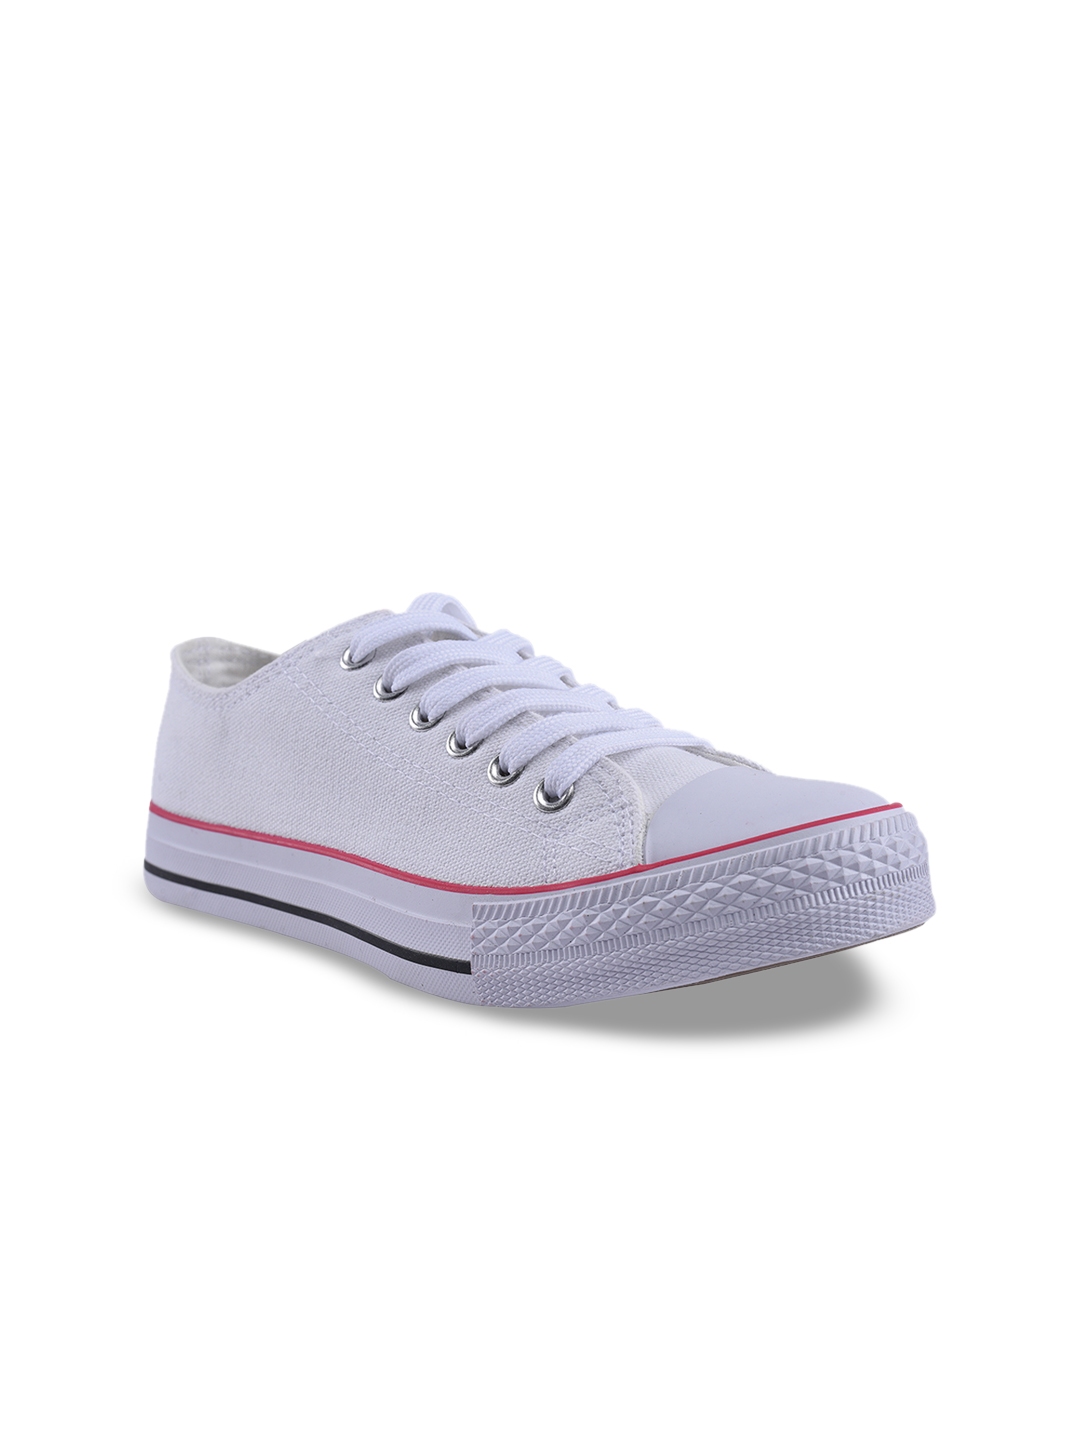 Buy Admiral Women White Sneakers - Casual Shoes for Women 4451497 | Myntra